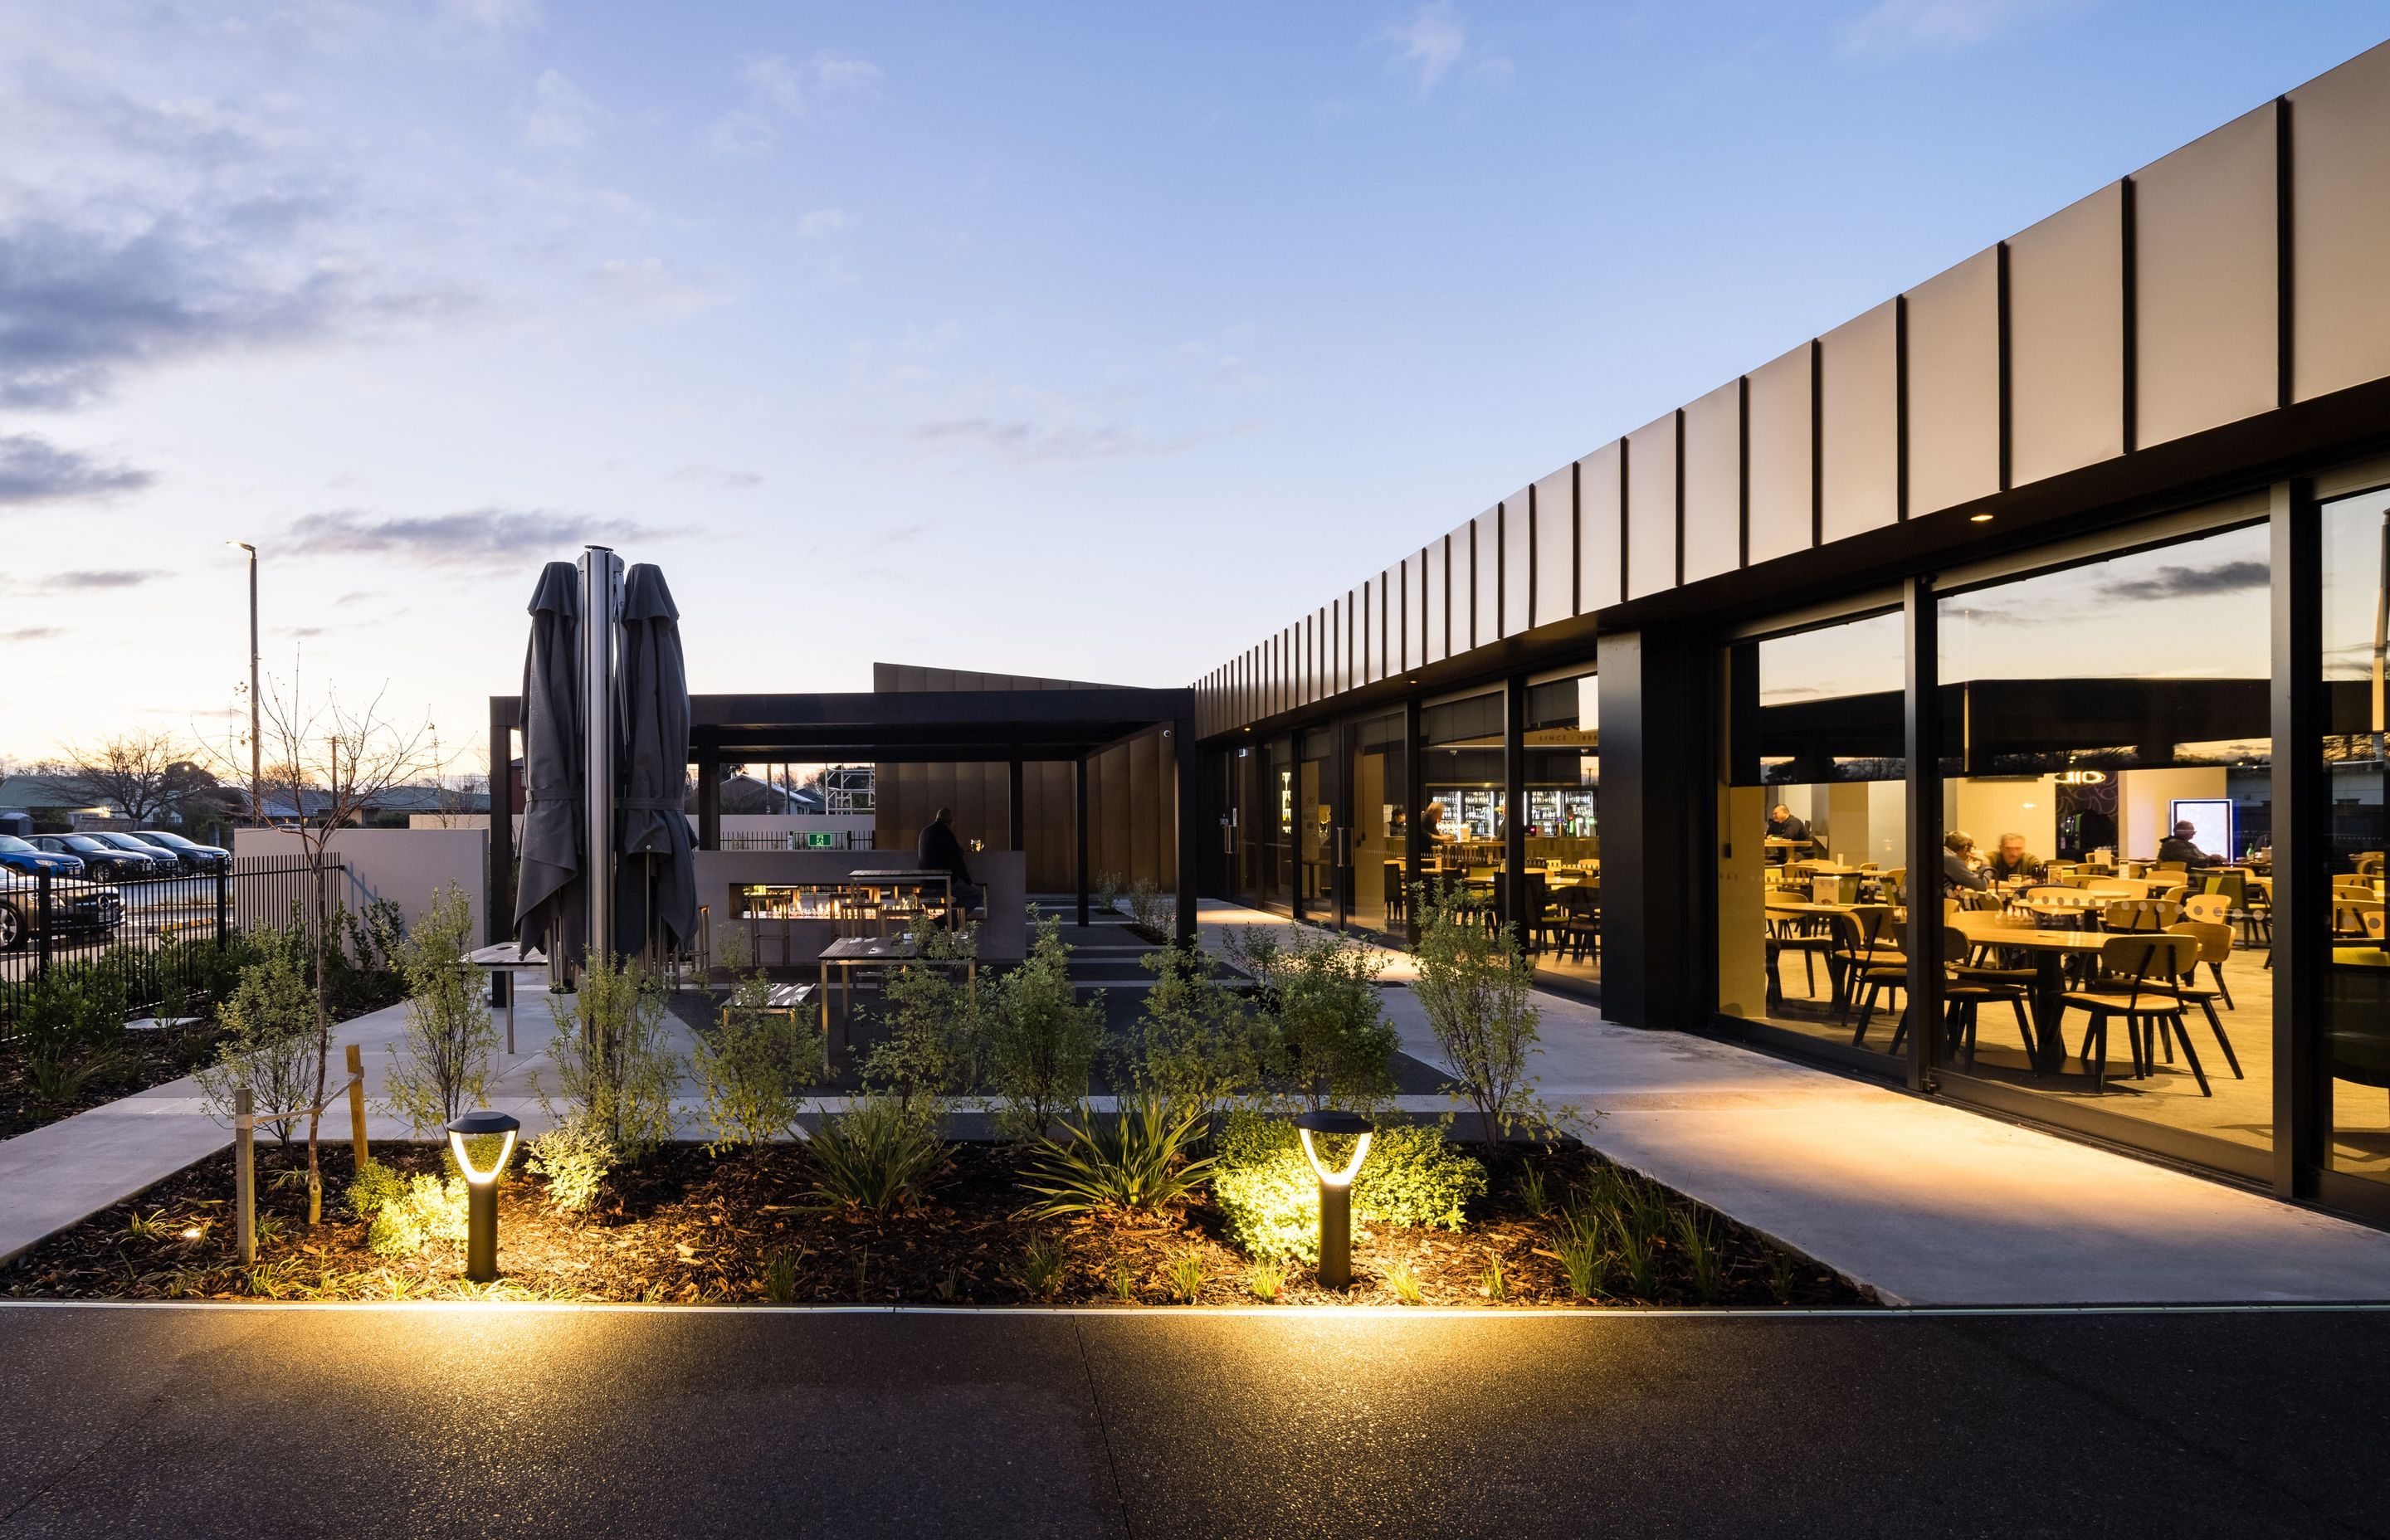 Located adjacent to The Tap Room, a large outdoor terrace provides a pleasant setting for outdoor dining and socialising. Photography by Clinton Lloyd.